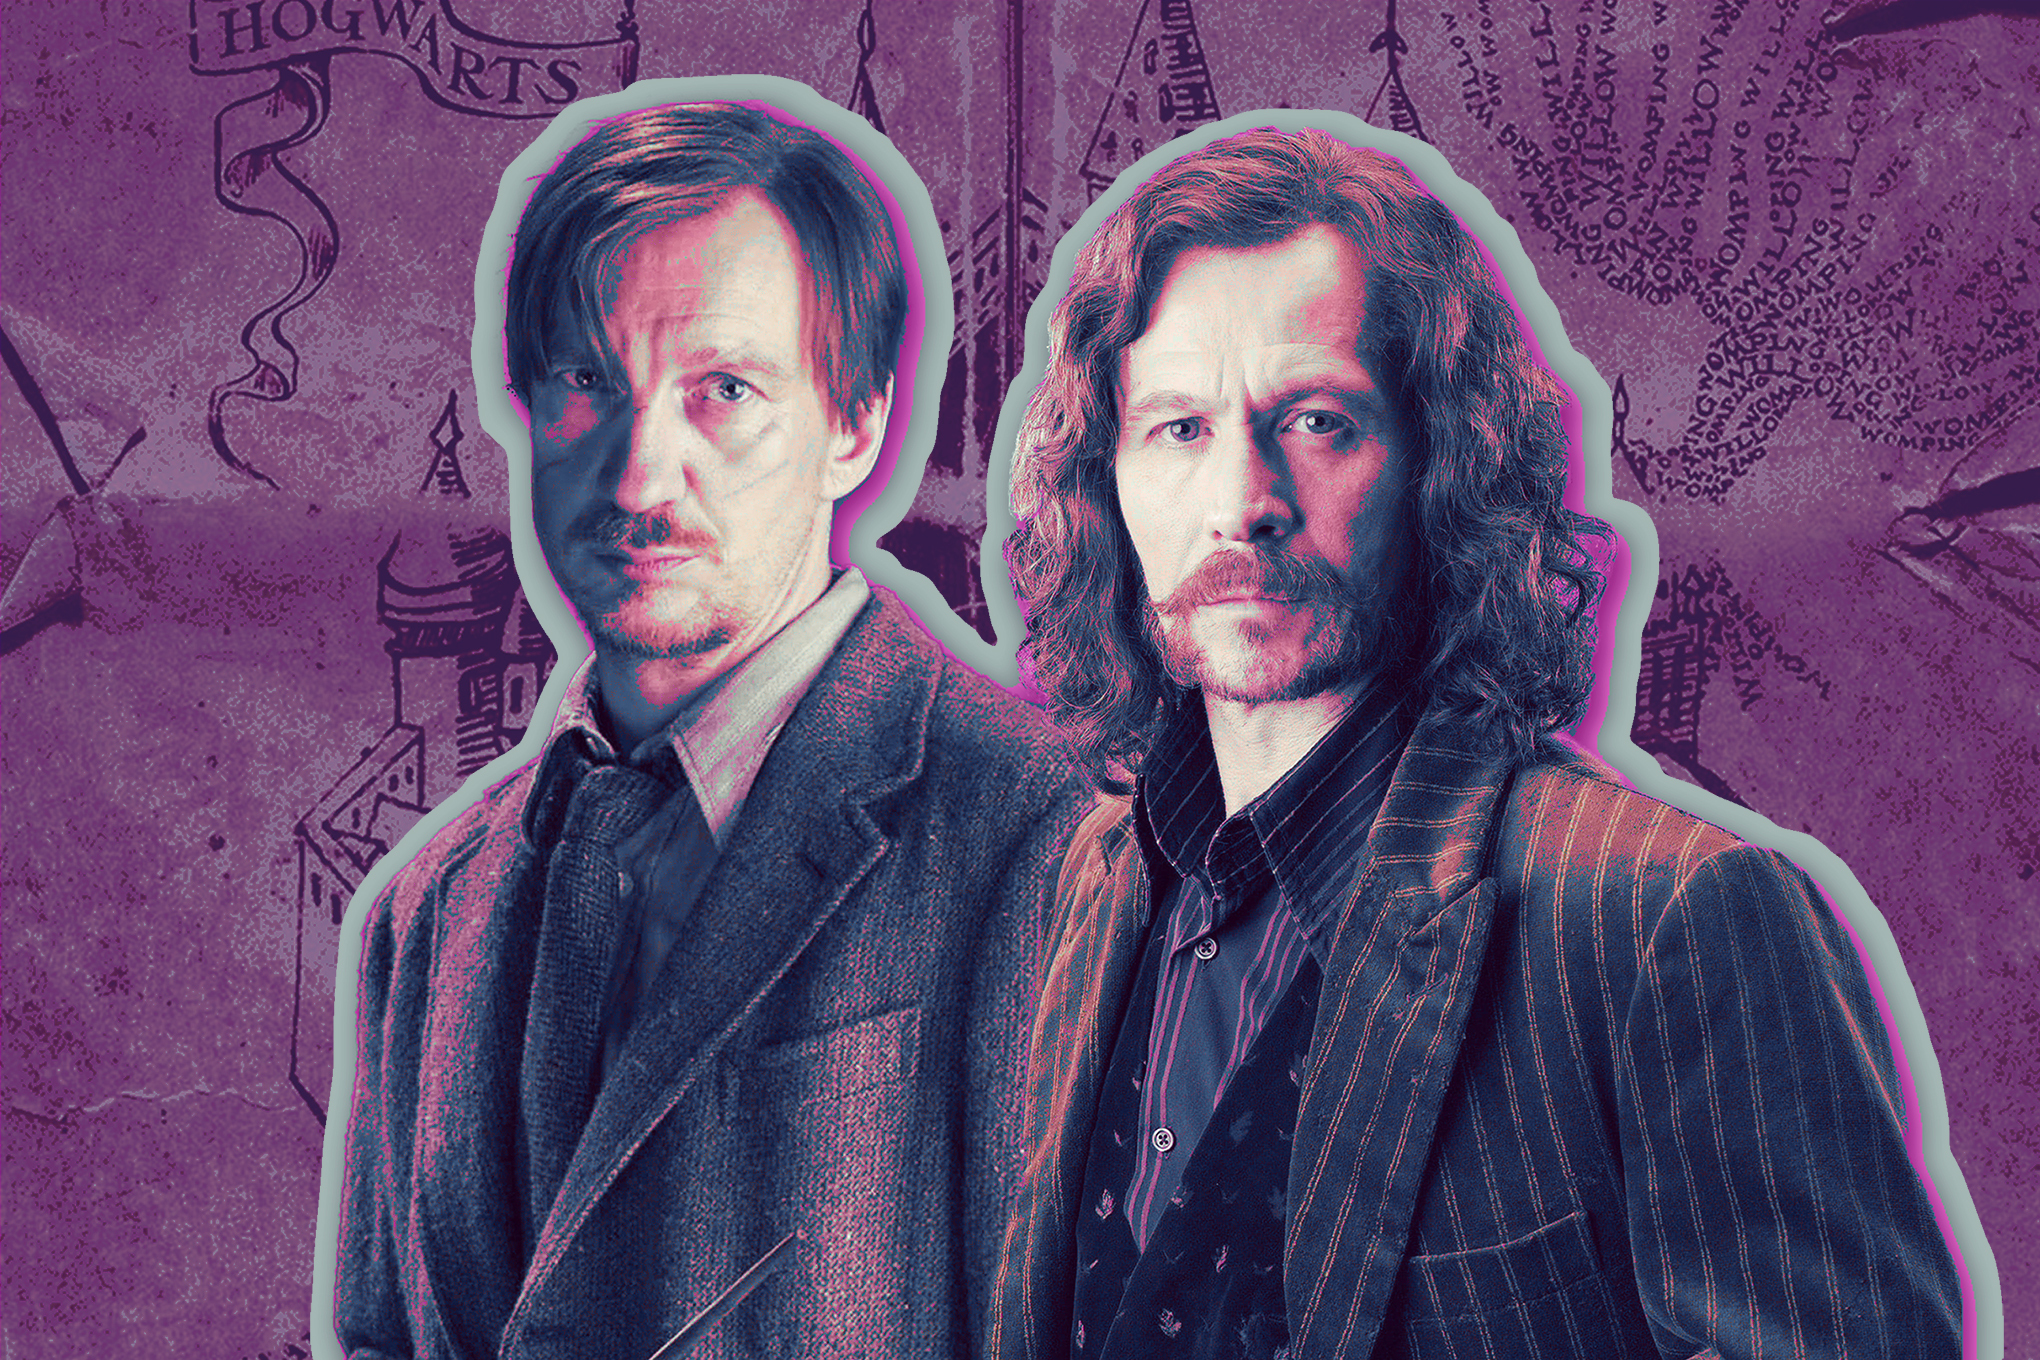 Remus Lupin and Sirius Black stand next to each other in front of a purple backdrop, with the Maurader’s map print.